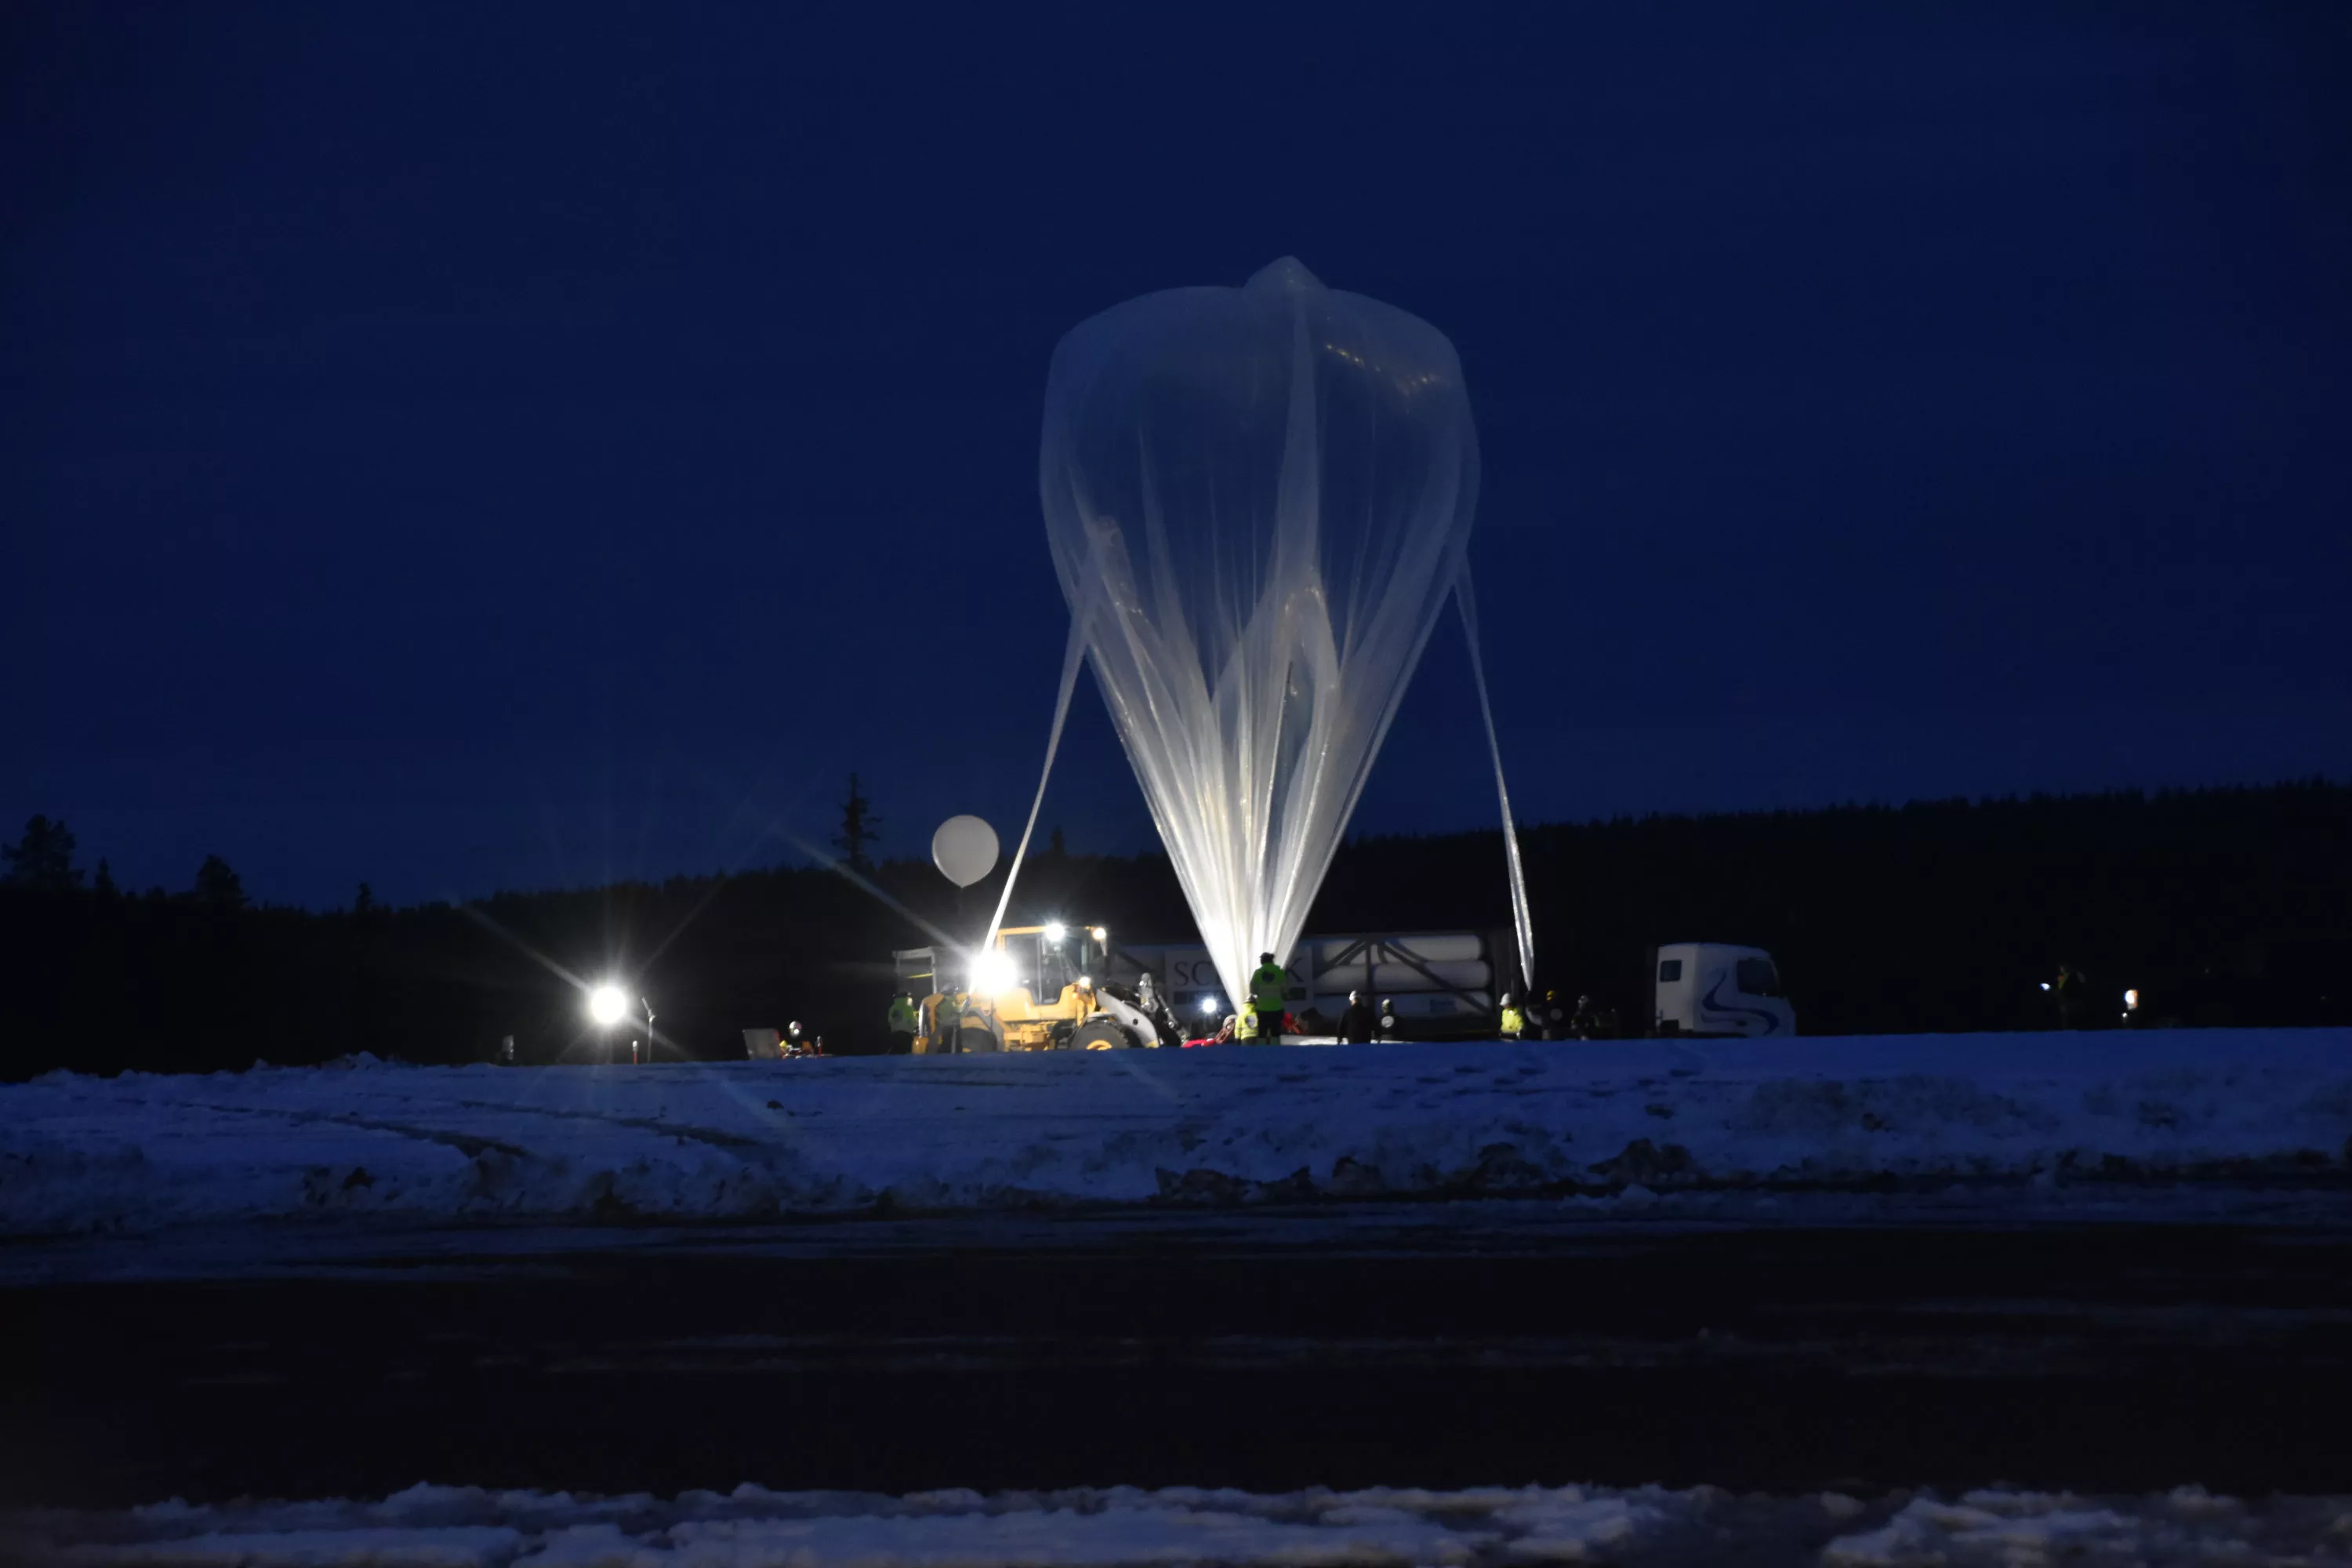 Bexus balloon 33 before launching into the stratosphere.